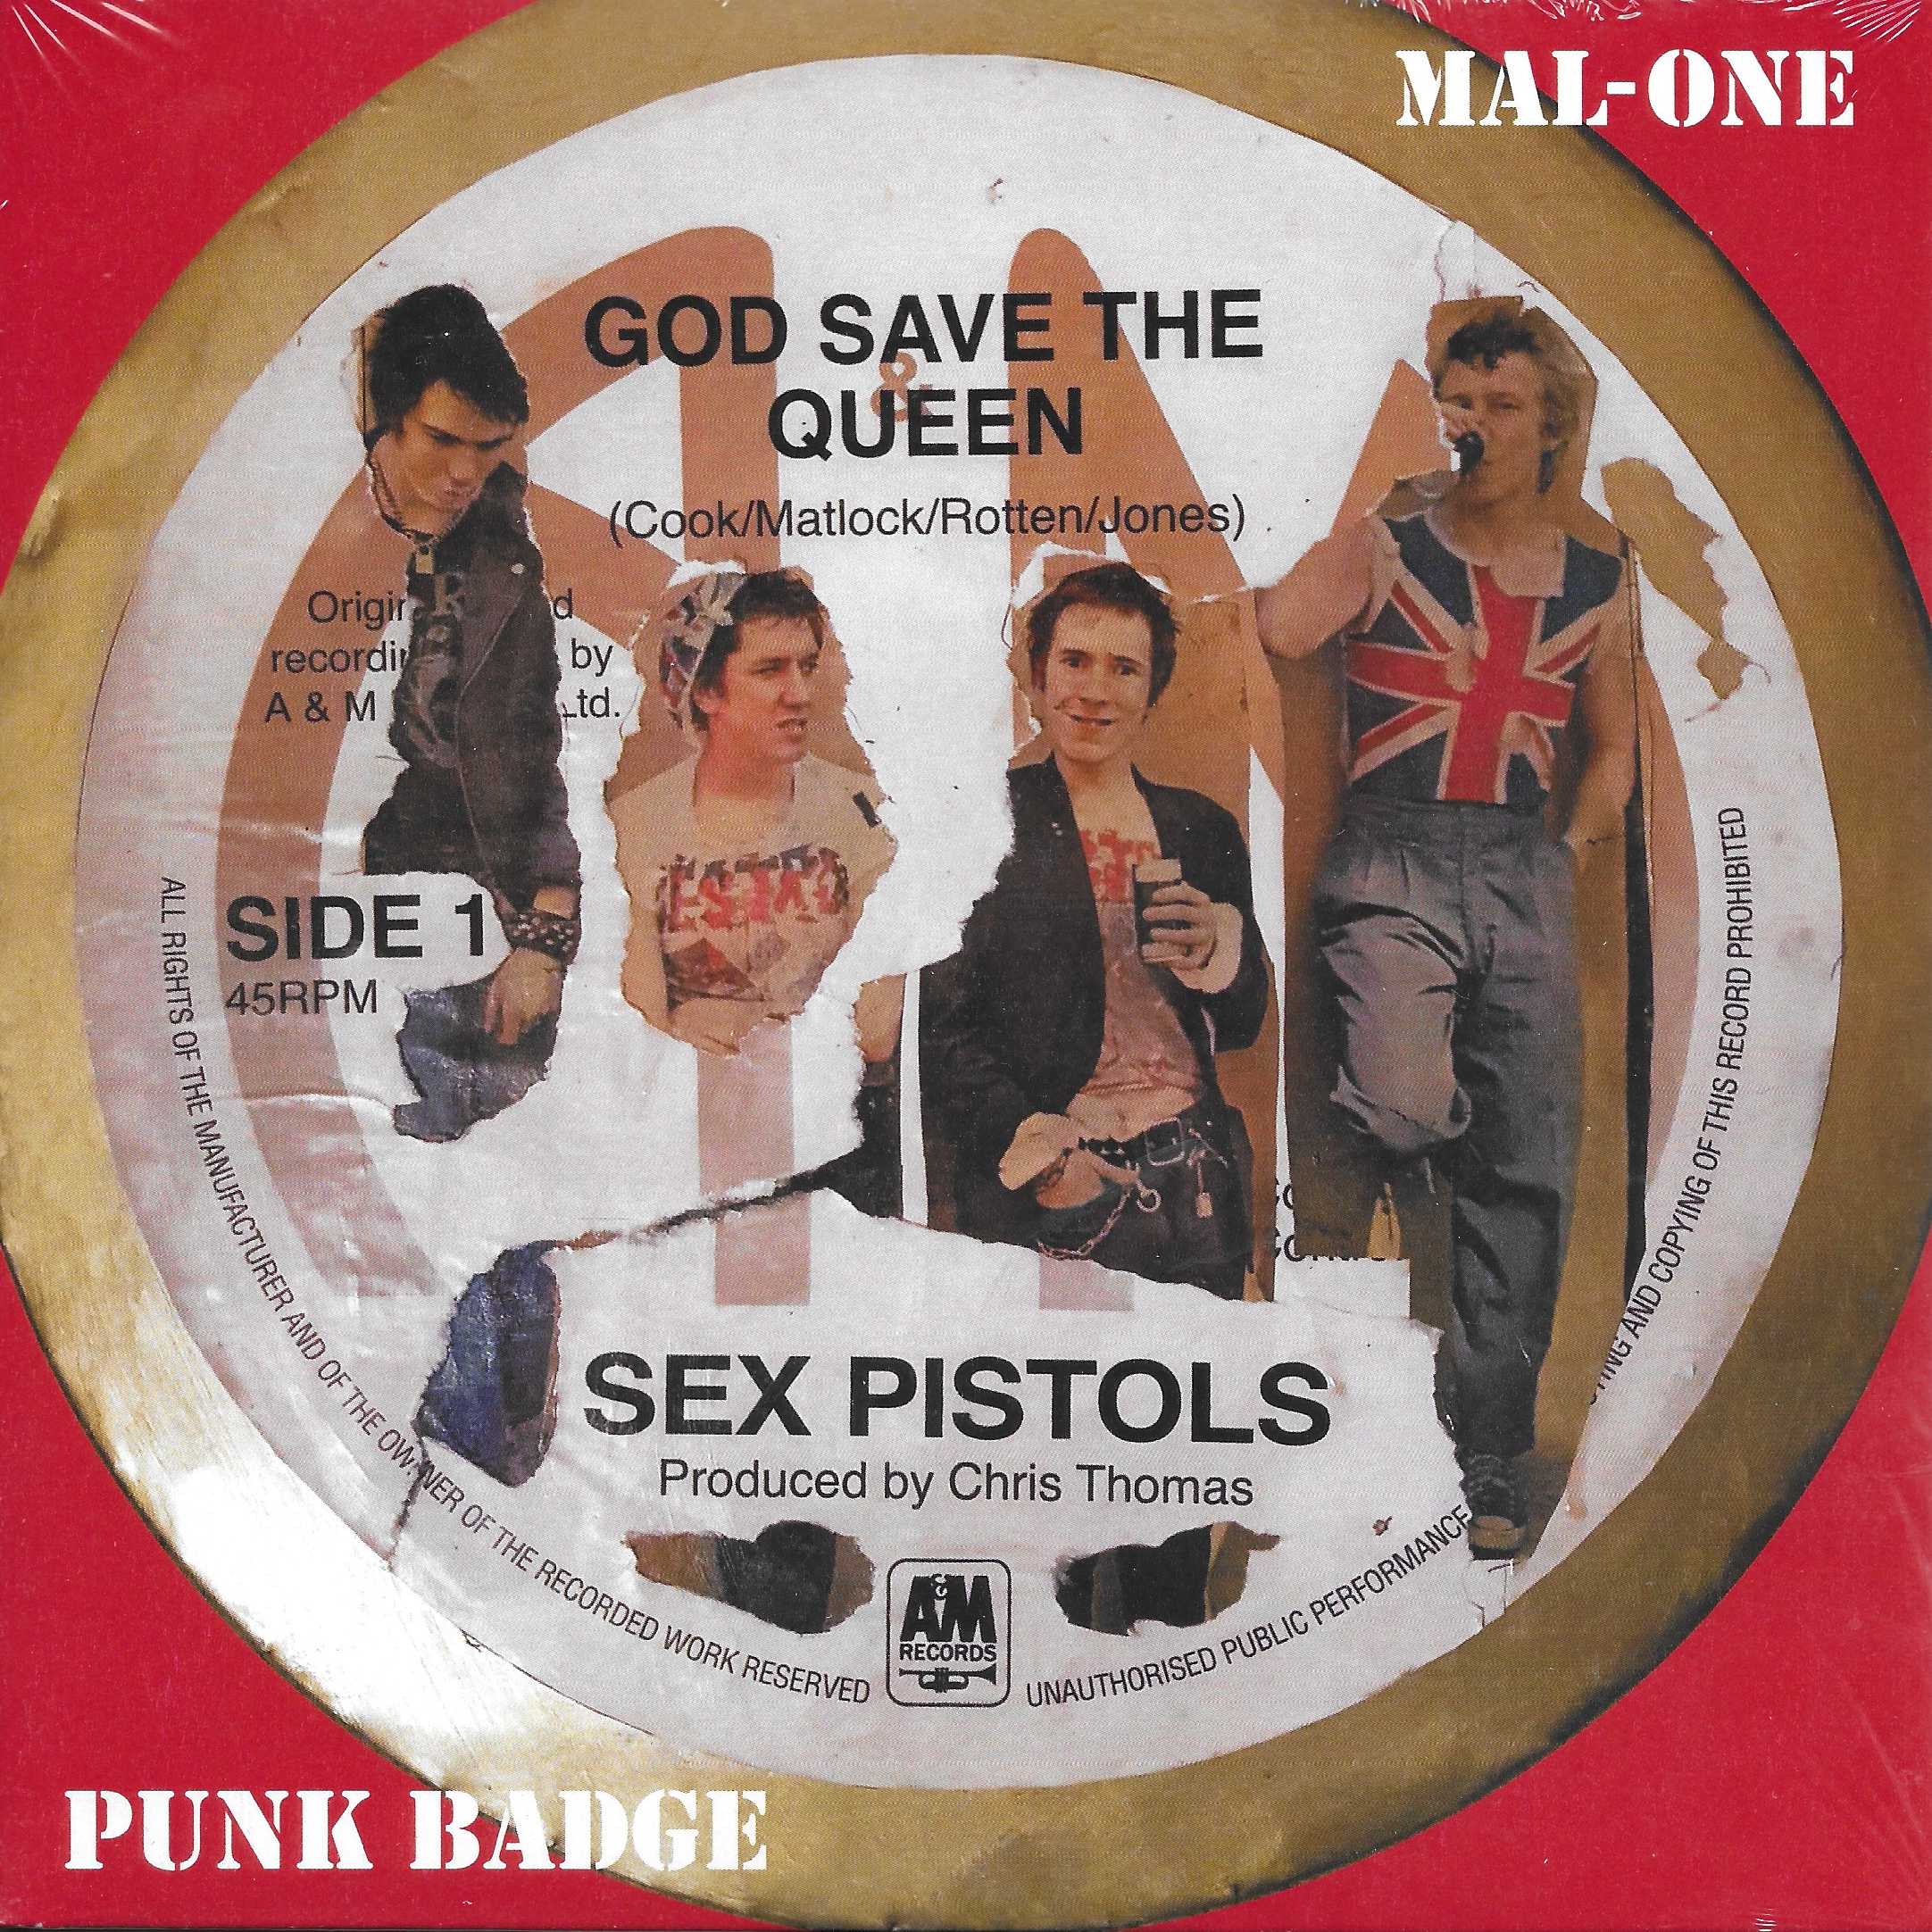 Picture of MAL-ONE-004 3 God save the Queen - Record Store Day 2021 by artist Mal-One 